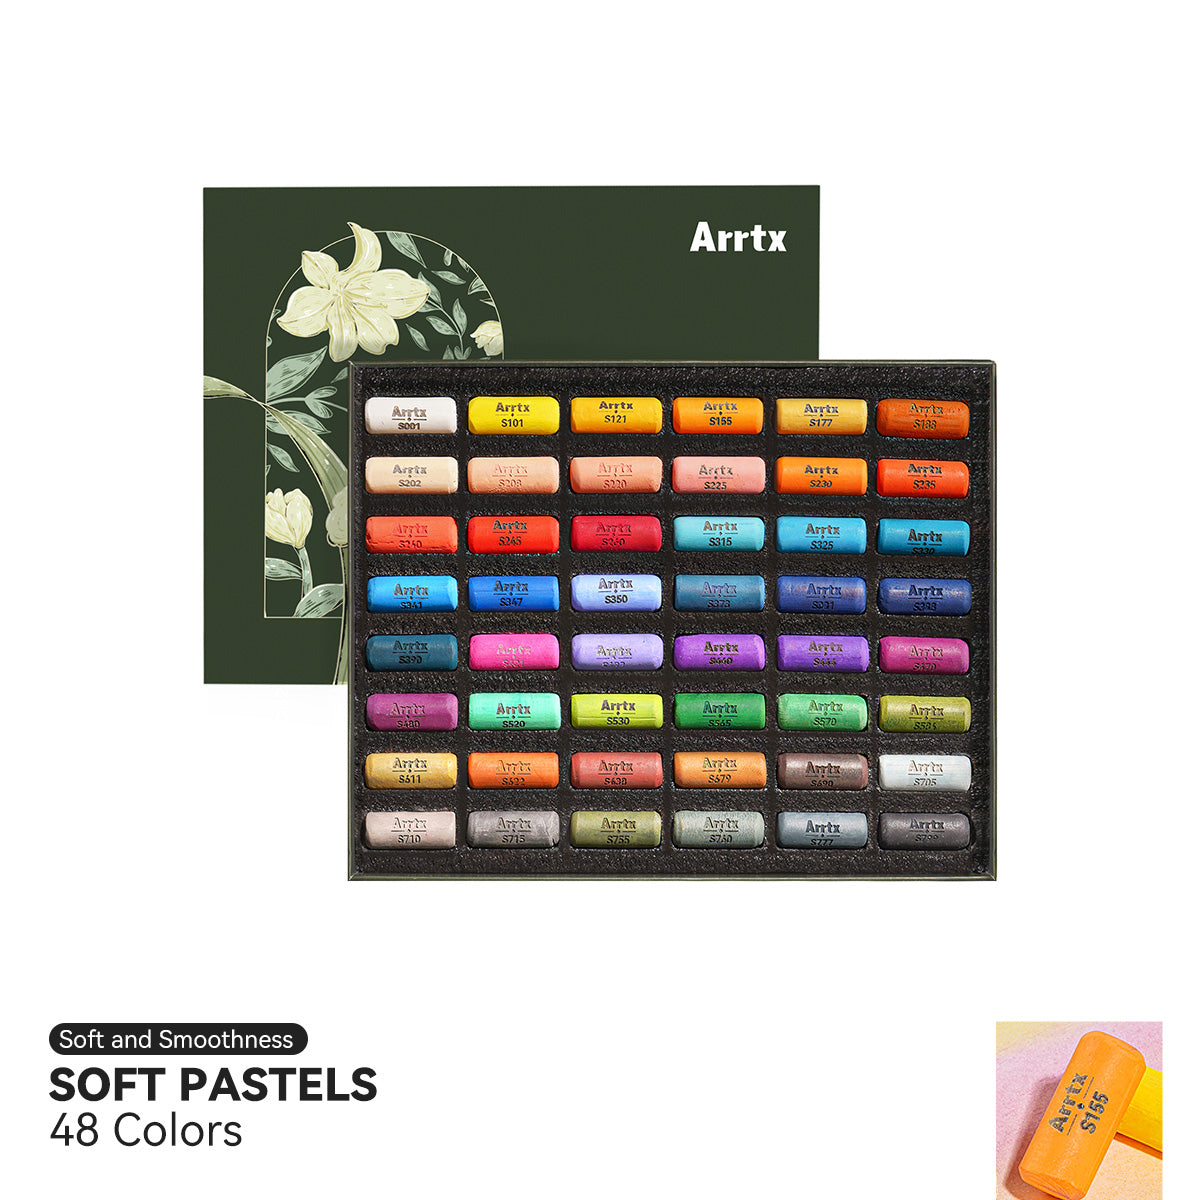 Arrtx Soft Pastels Art Supplies, 48 Assorted Colors Chalk Pastels Creamy  Soft and High Adhesion for Artist Beginners Traditional Art Creation